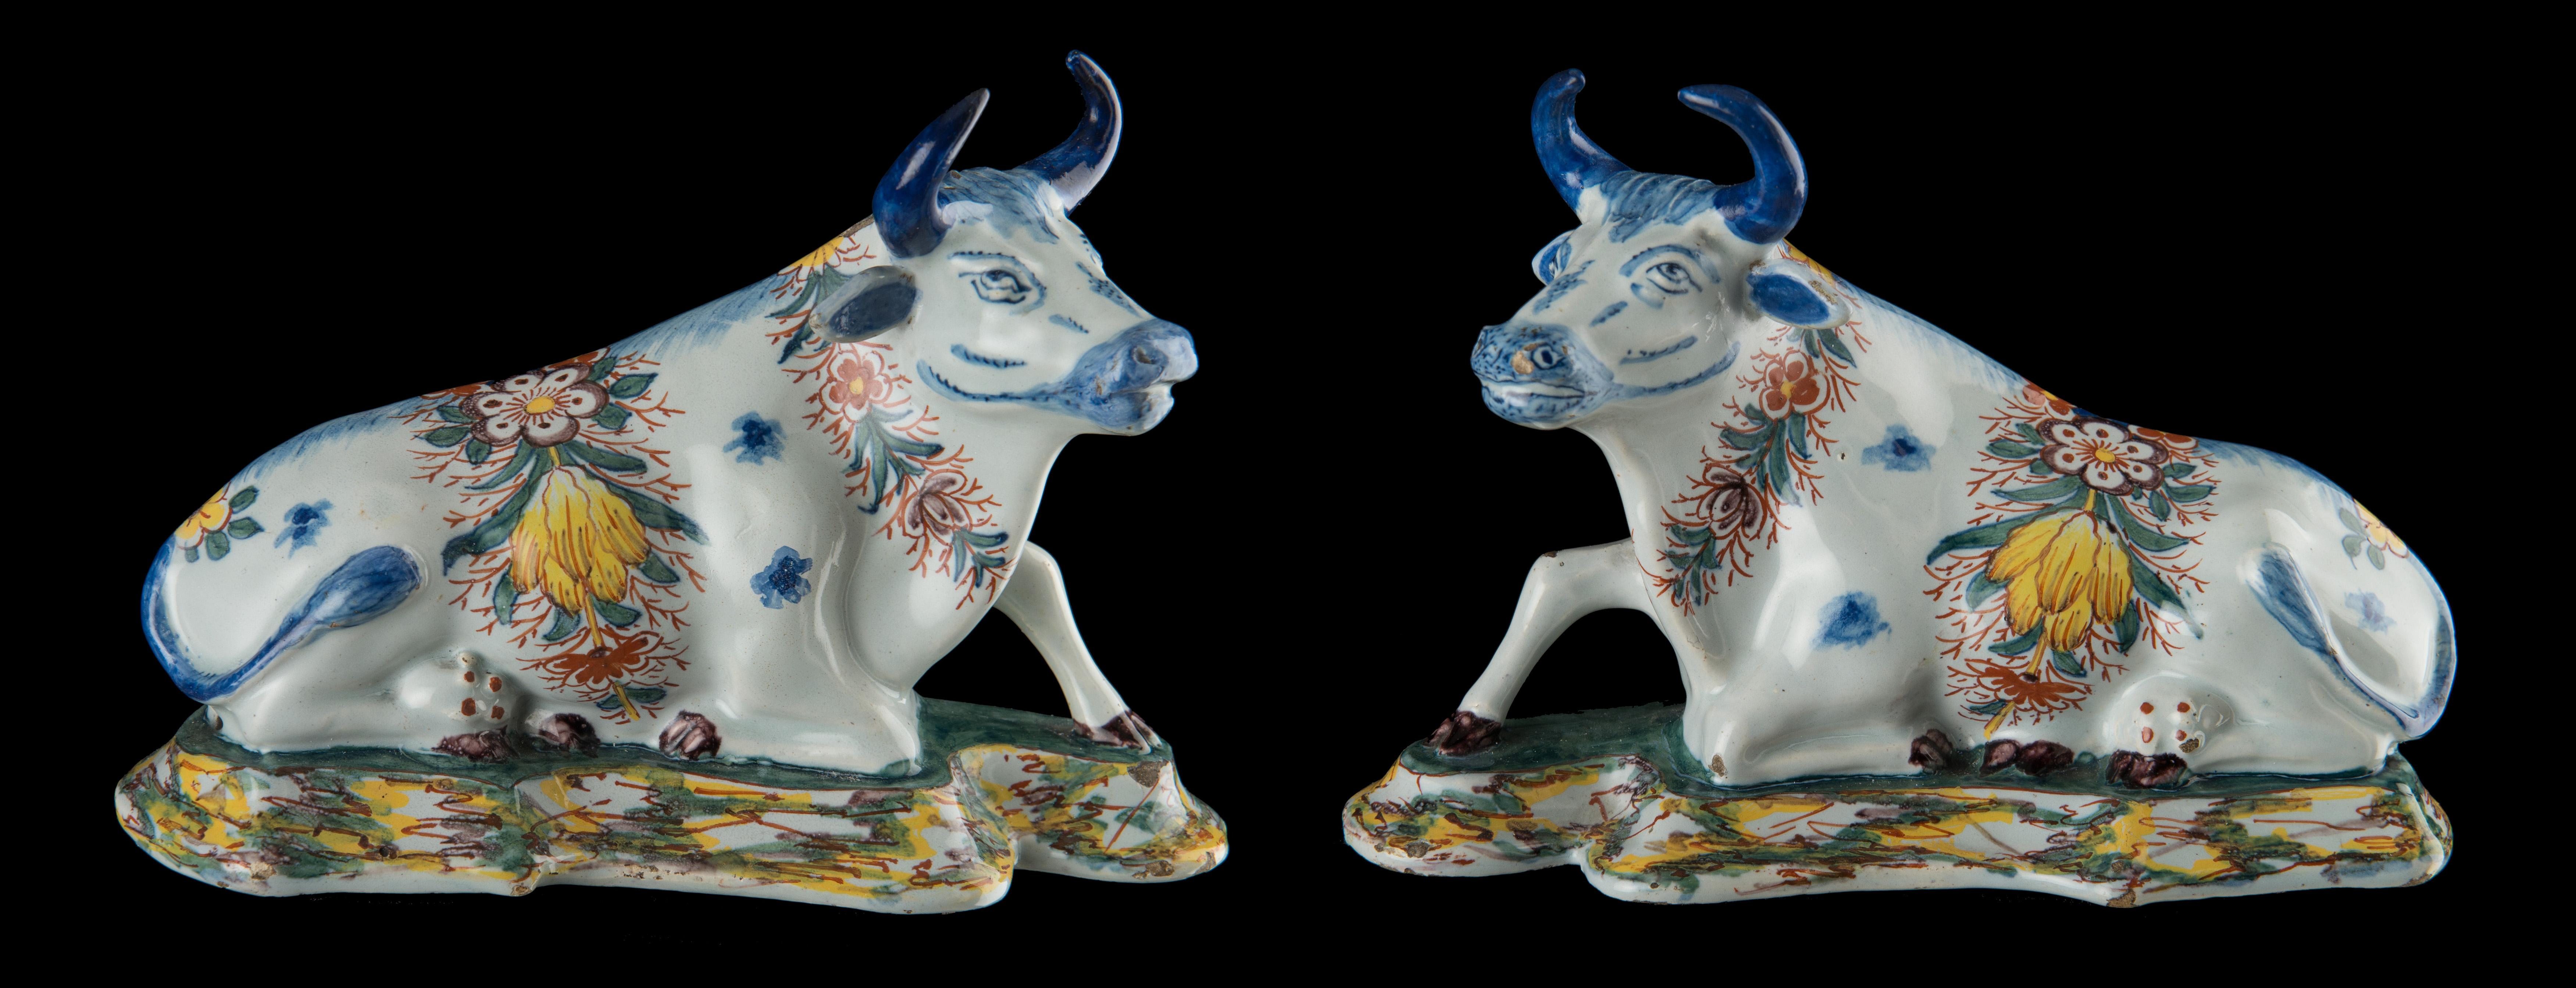 Pair of polychrome reclining cows, Delft, circa 1760 
The Two Ships pottery. Mark: AP, period of Anthonij Pennis (1750-1770) or his widow Rachel Overgaauw-Pennis (1770-1782) 
The two modelled reclining cows lie on a base and have their heads turned